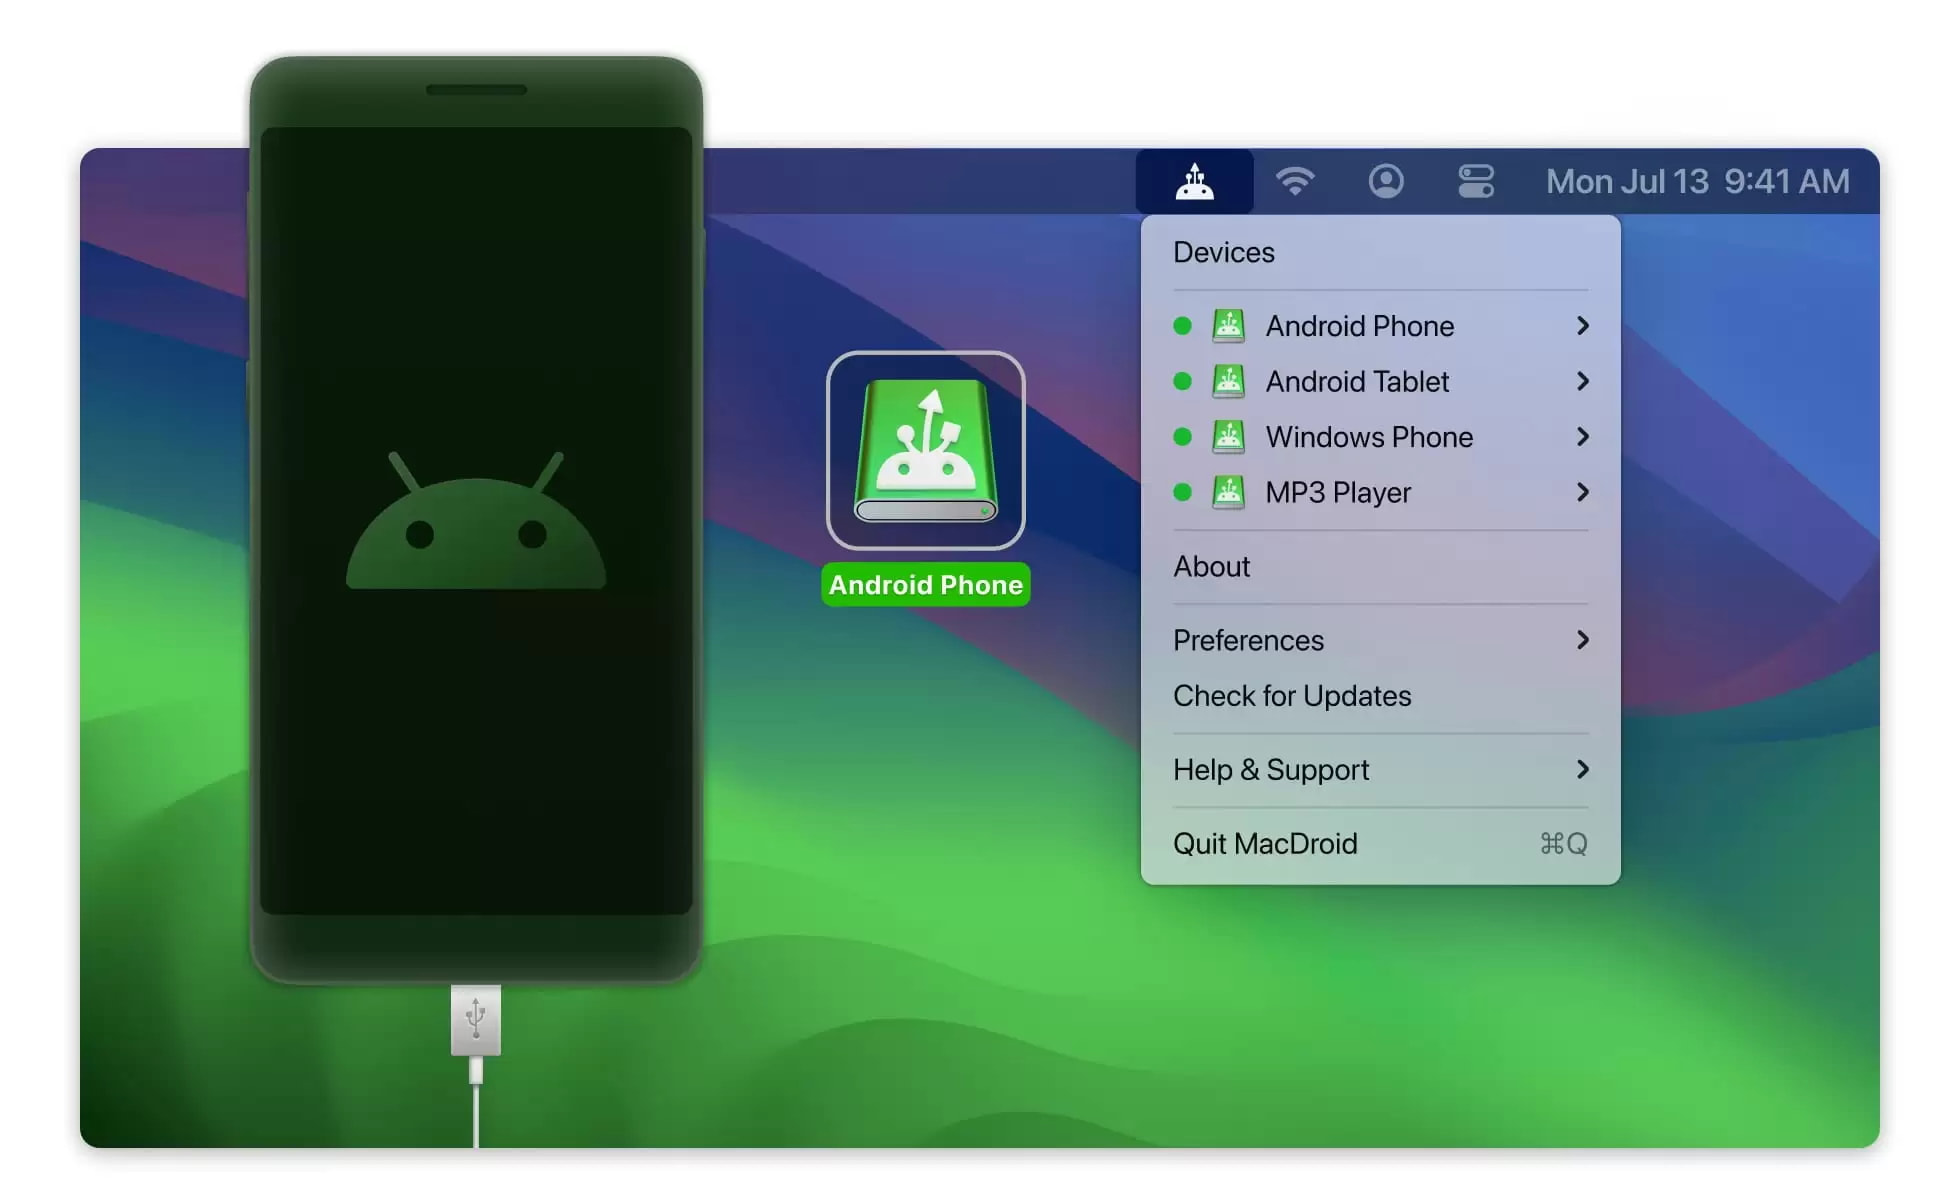 MacDroid best app for connect Android phone to Mac